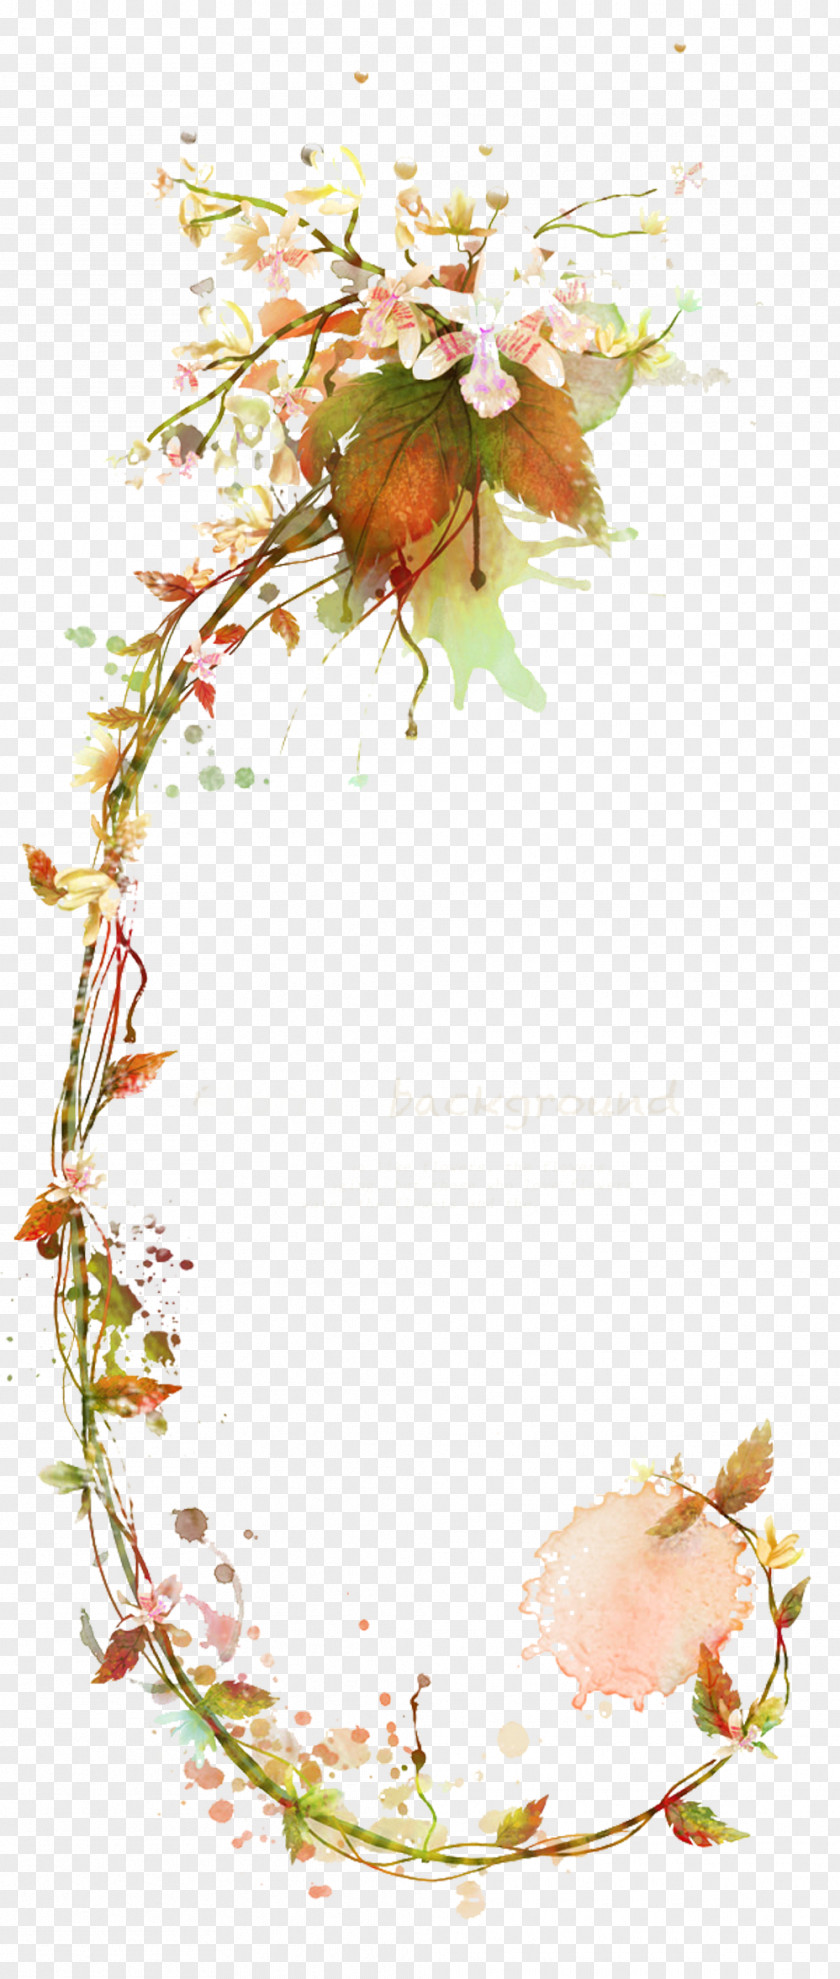 Pear Tree Branch Picture Material Flower Vine Illustration PNG